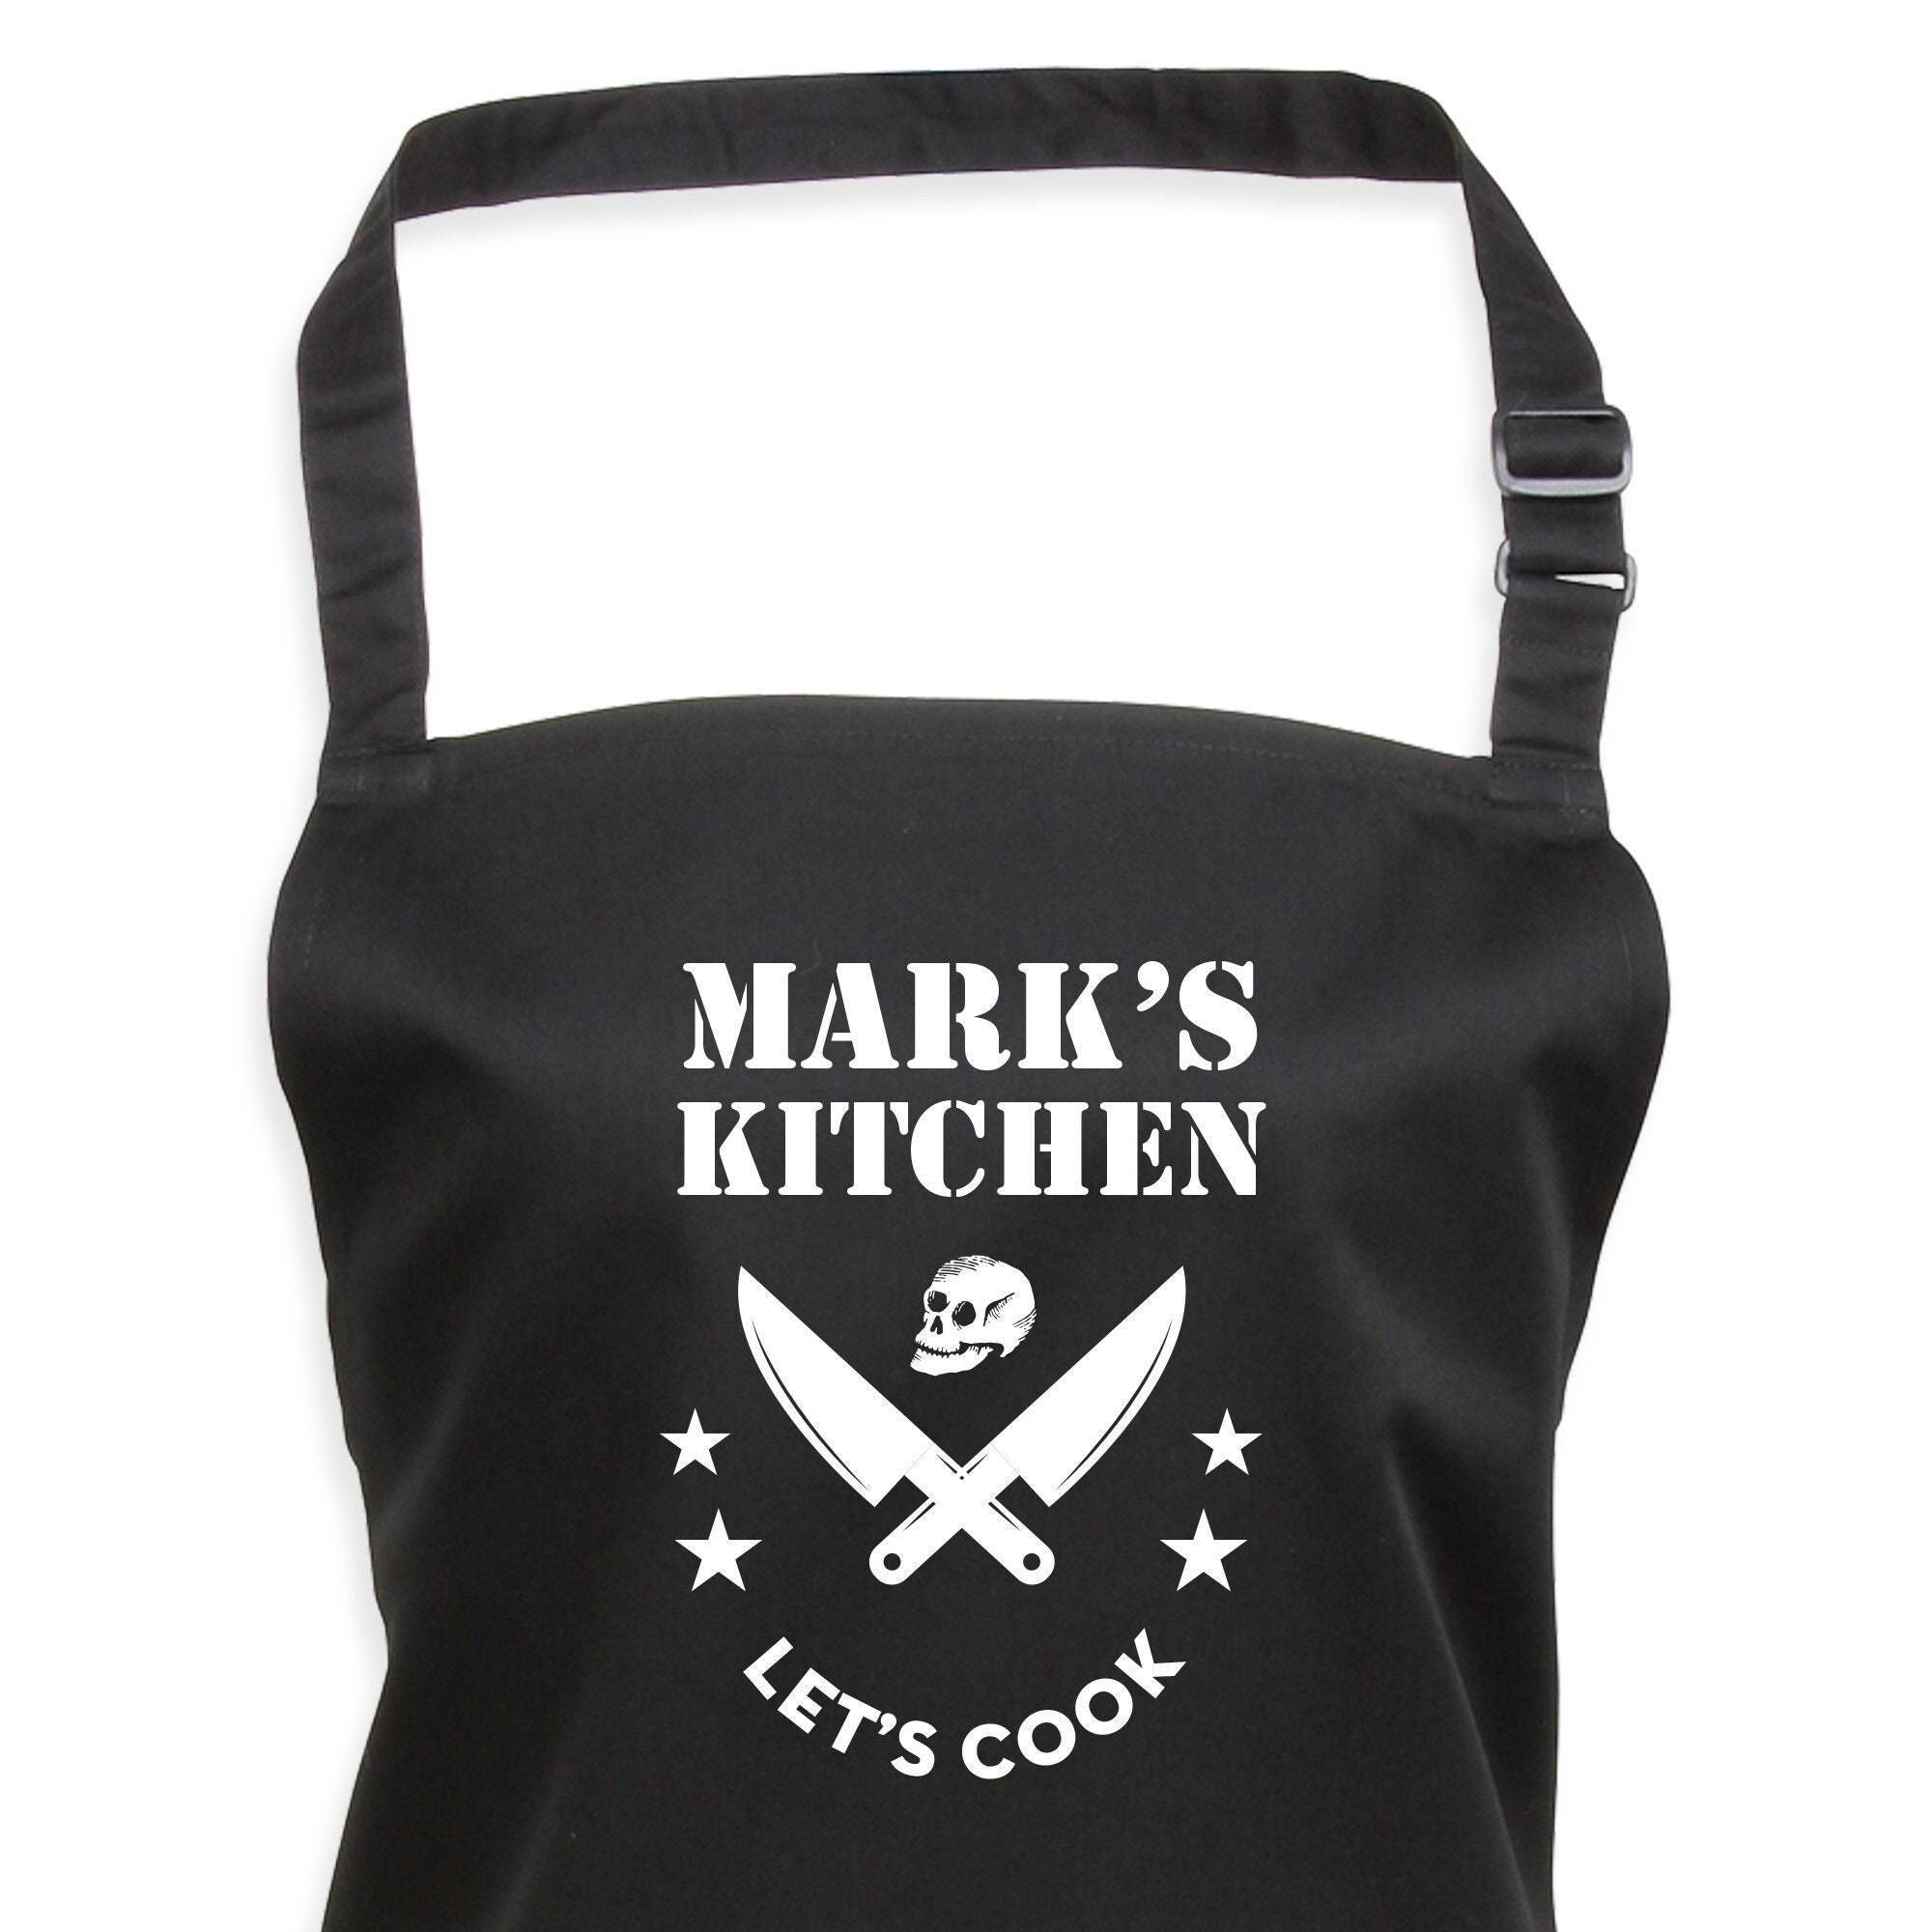 Personalised cooking apron for men, Let's cook kitchen gift for him, uncle, dad